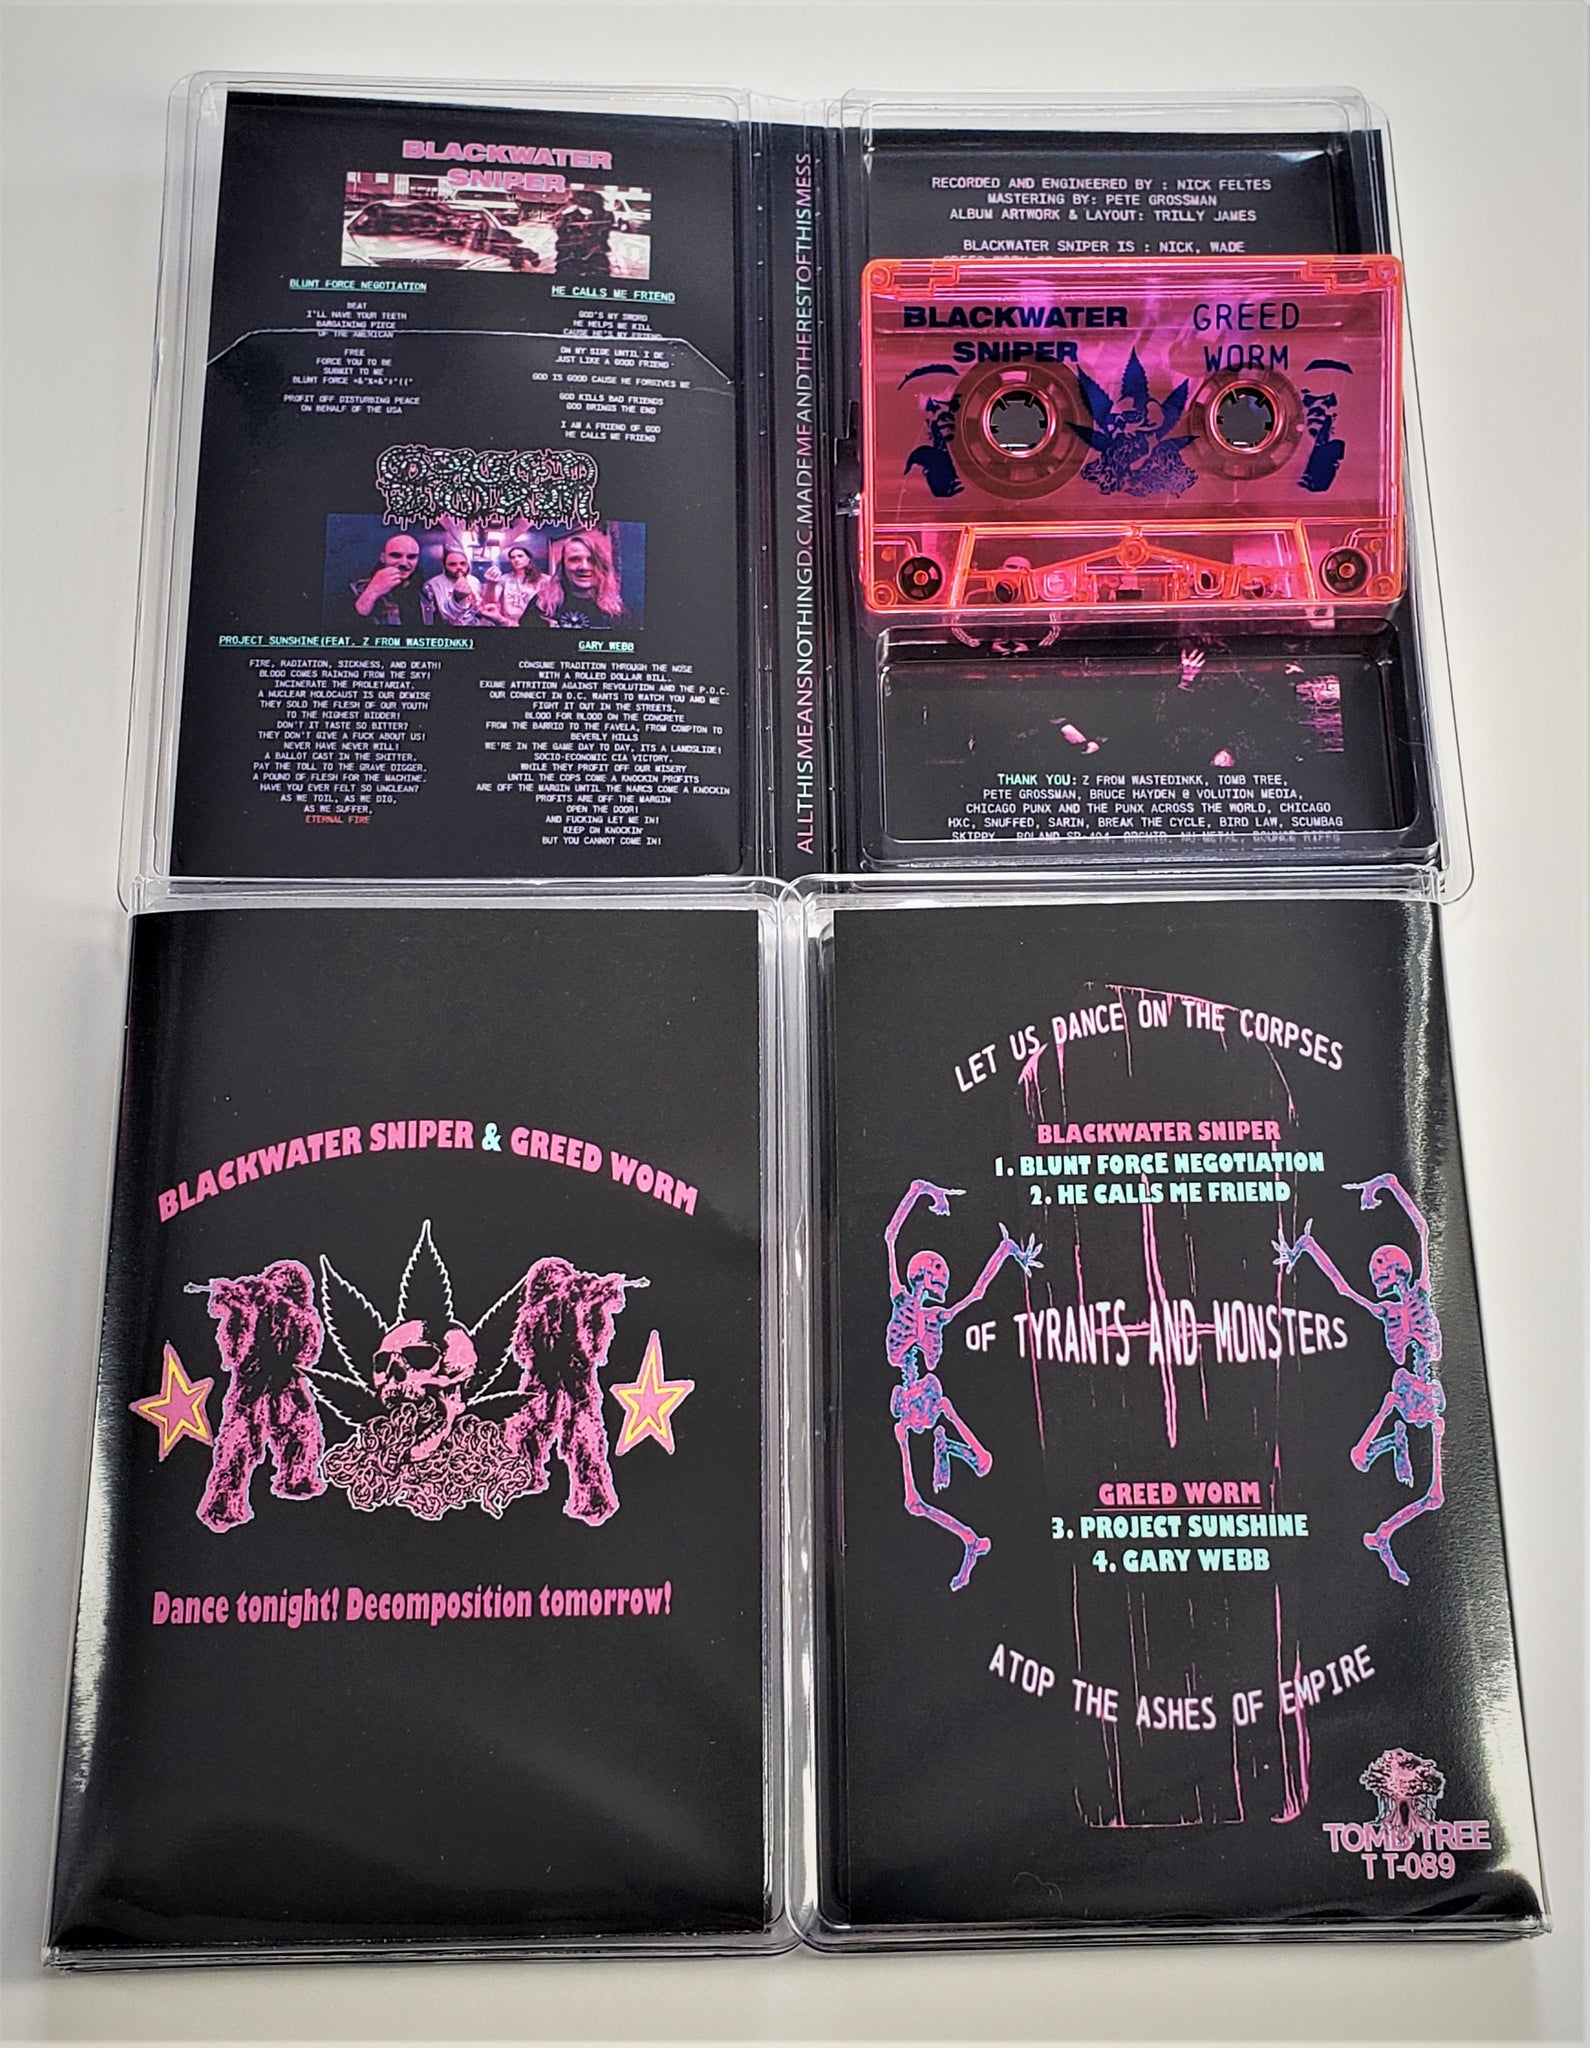 GREED WORM + BLACKWATER SNIPER - Dance tonight! Decomposition tomorrow! (cassette)